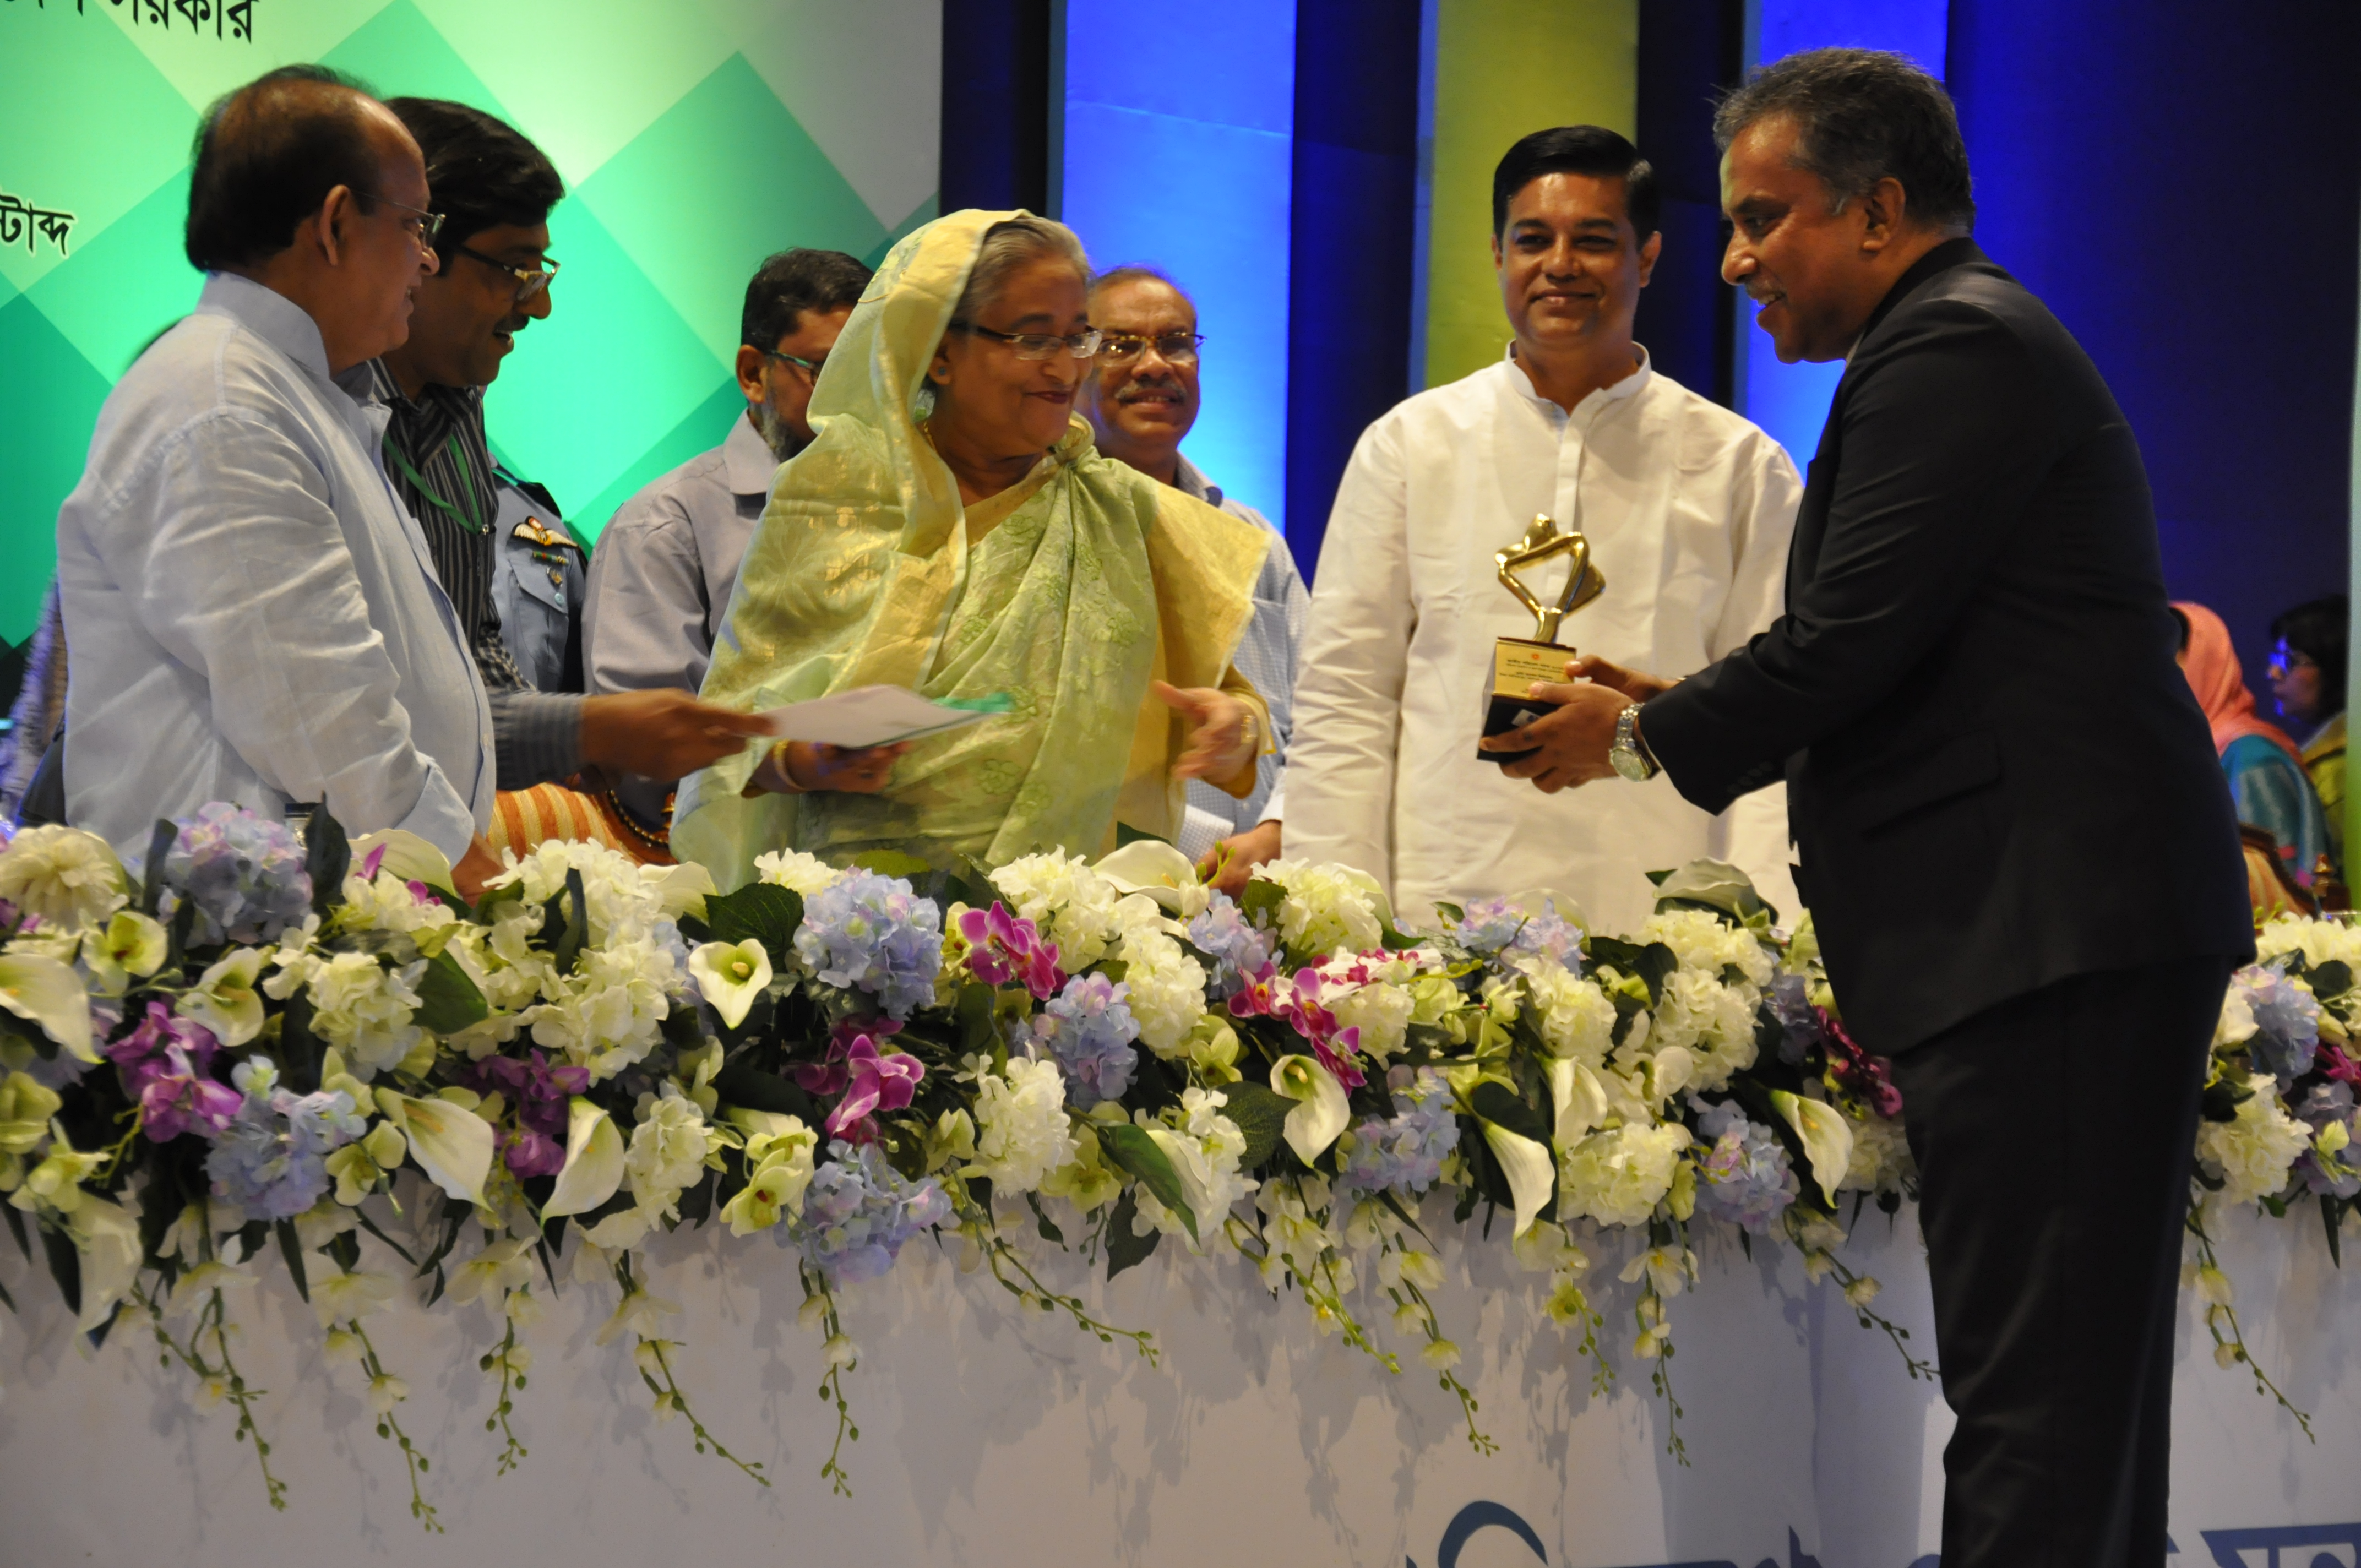 Mr. Md. Fazlul Hoque is receiving National Award on Environments 2016 from Prime Minister Sheikh Hasina 